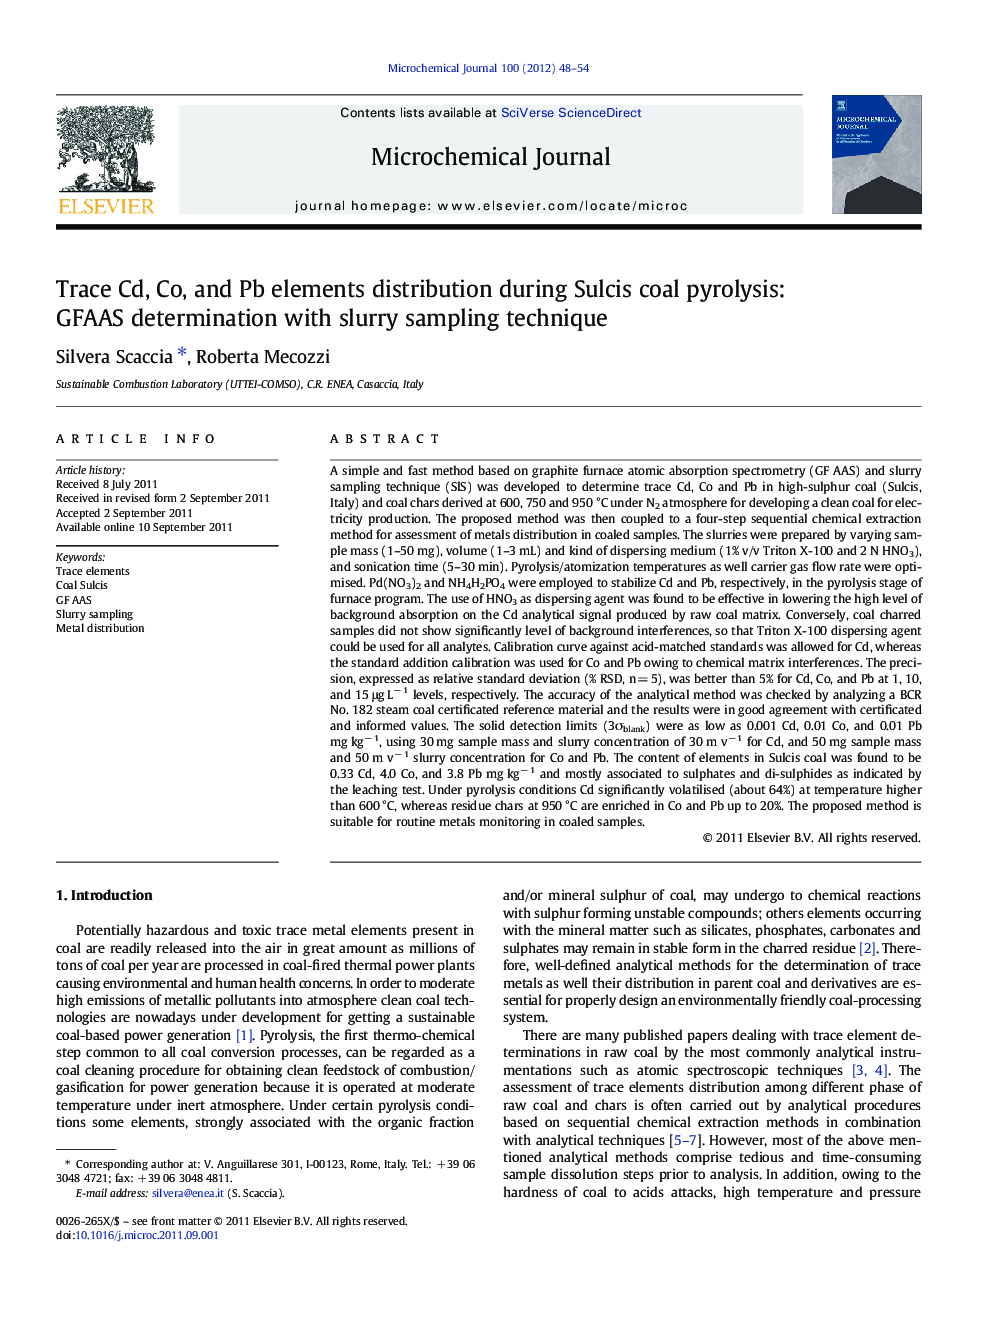 Trace Cd, Co, and Pb elements distribution during Sulcis coal pyrolysis: GFAAS determination with slurry sampling technique